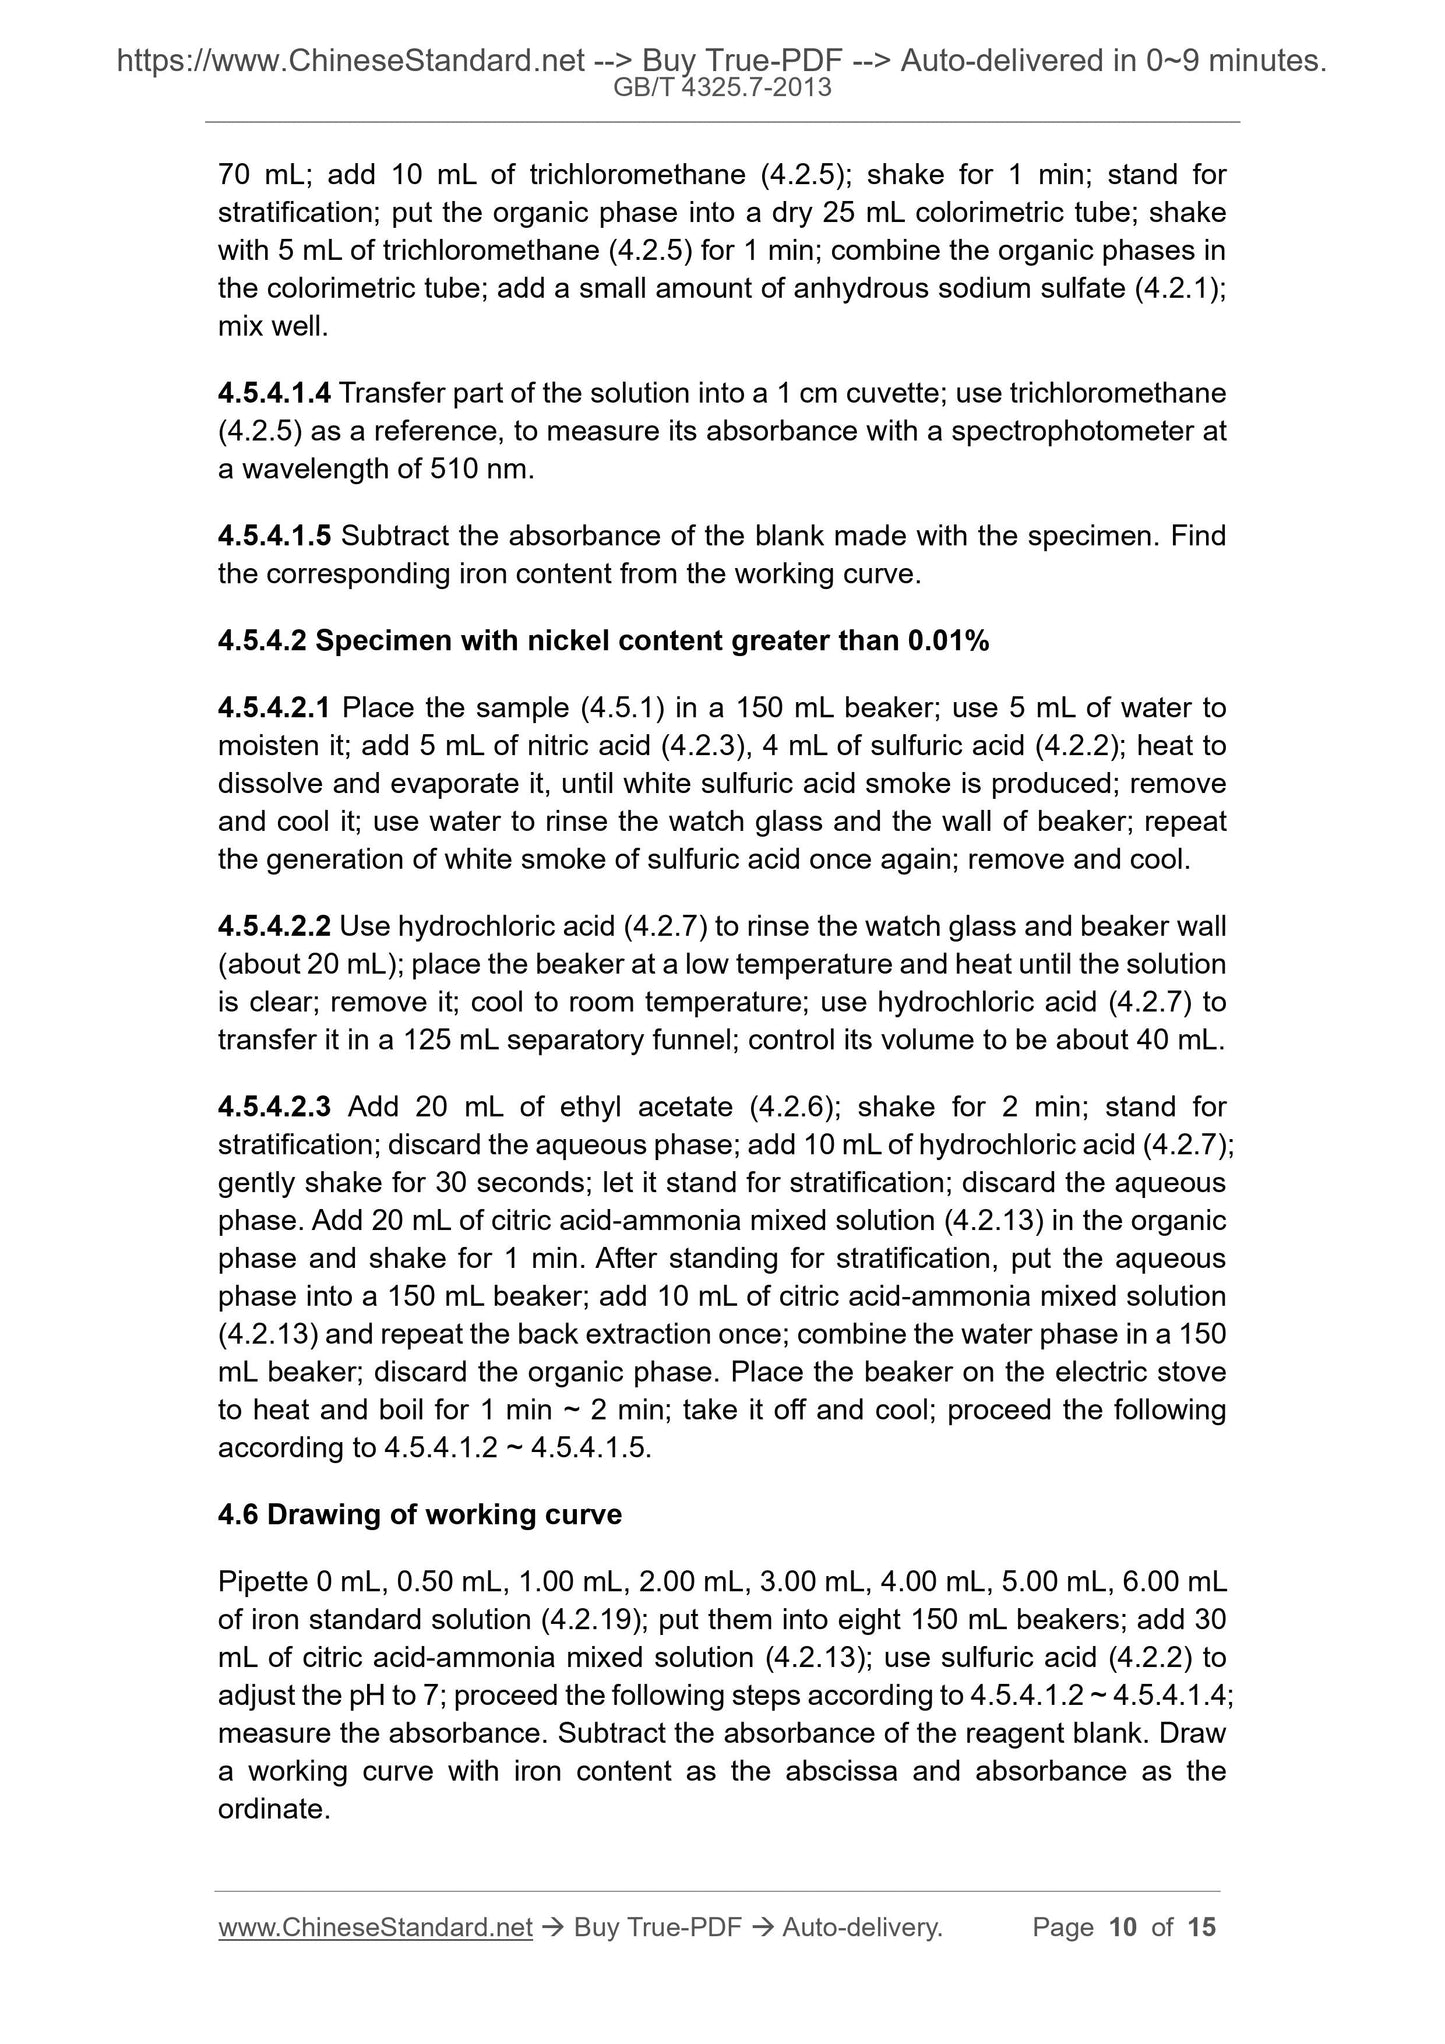 GB/T 4325.7-2013 Page 5